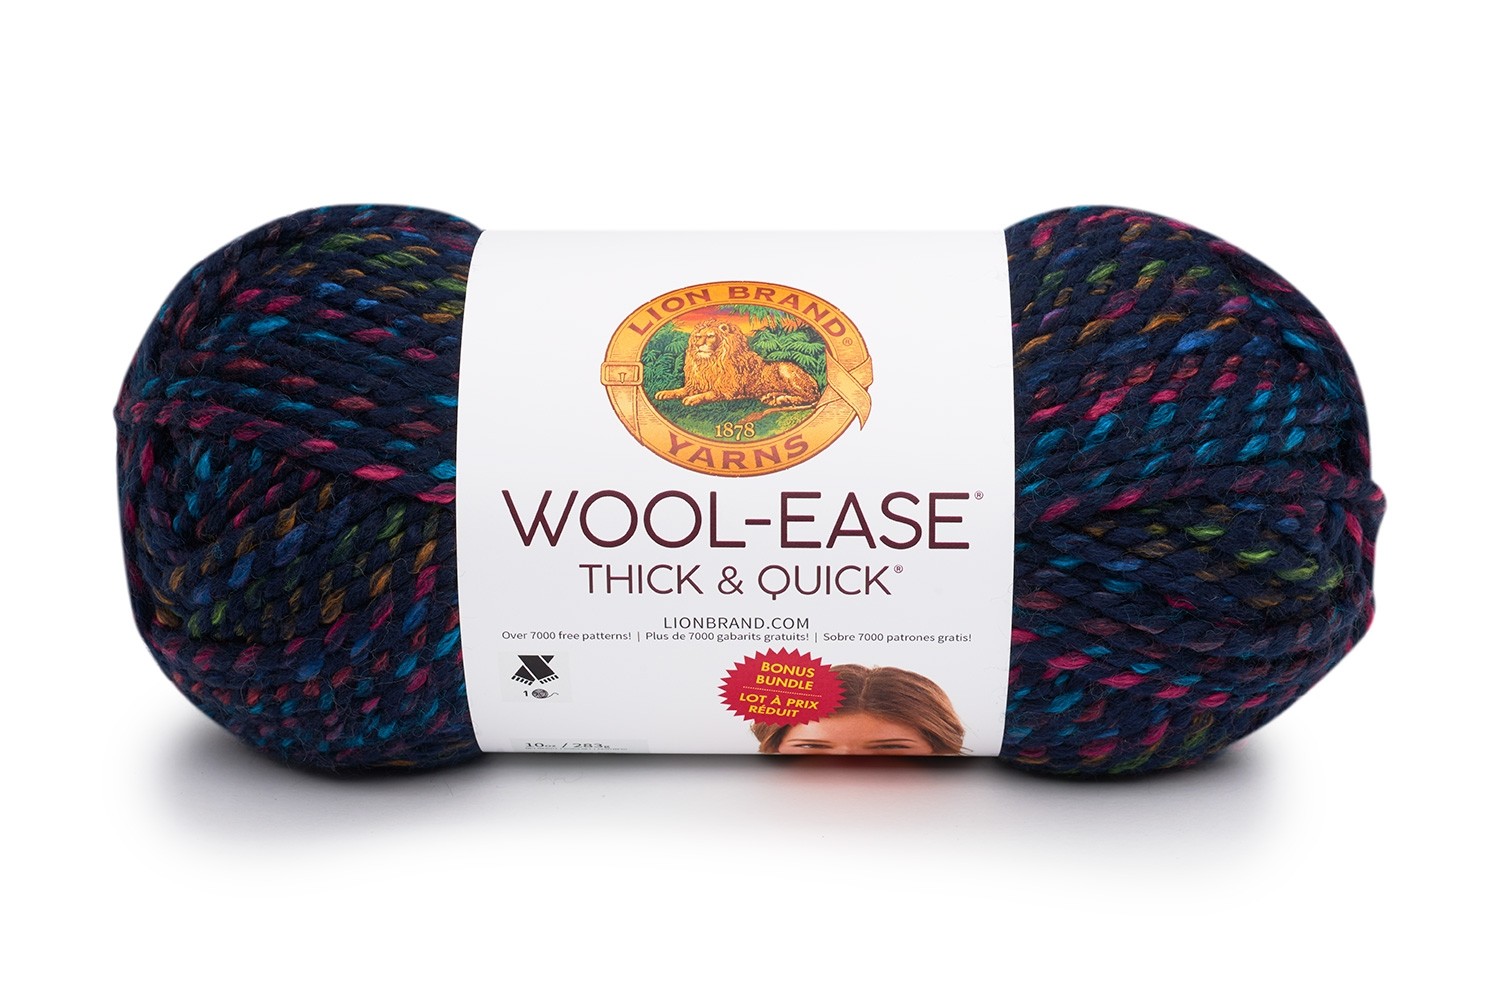 All Bundled Up: Wool-Ease Thick & Quick